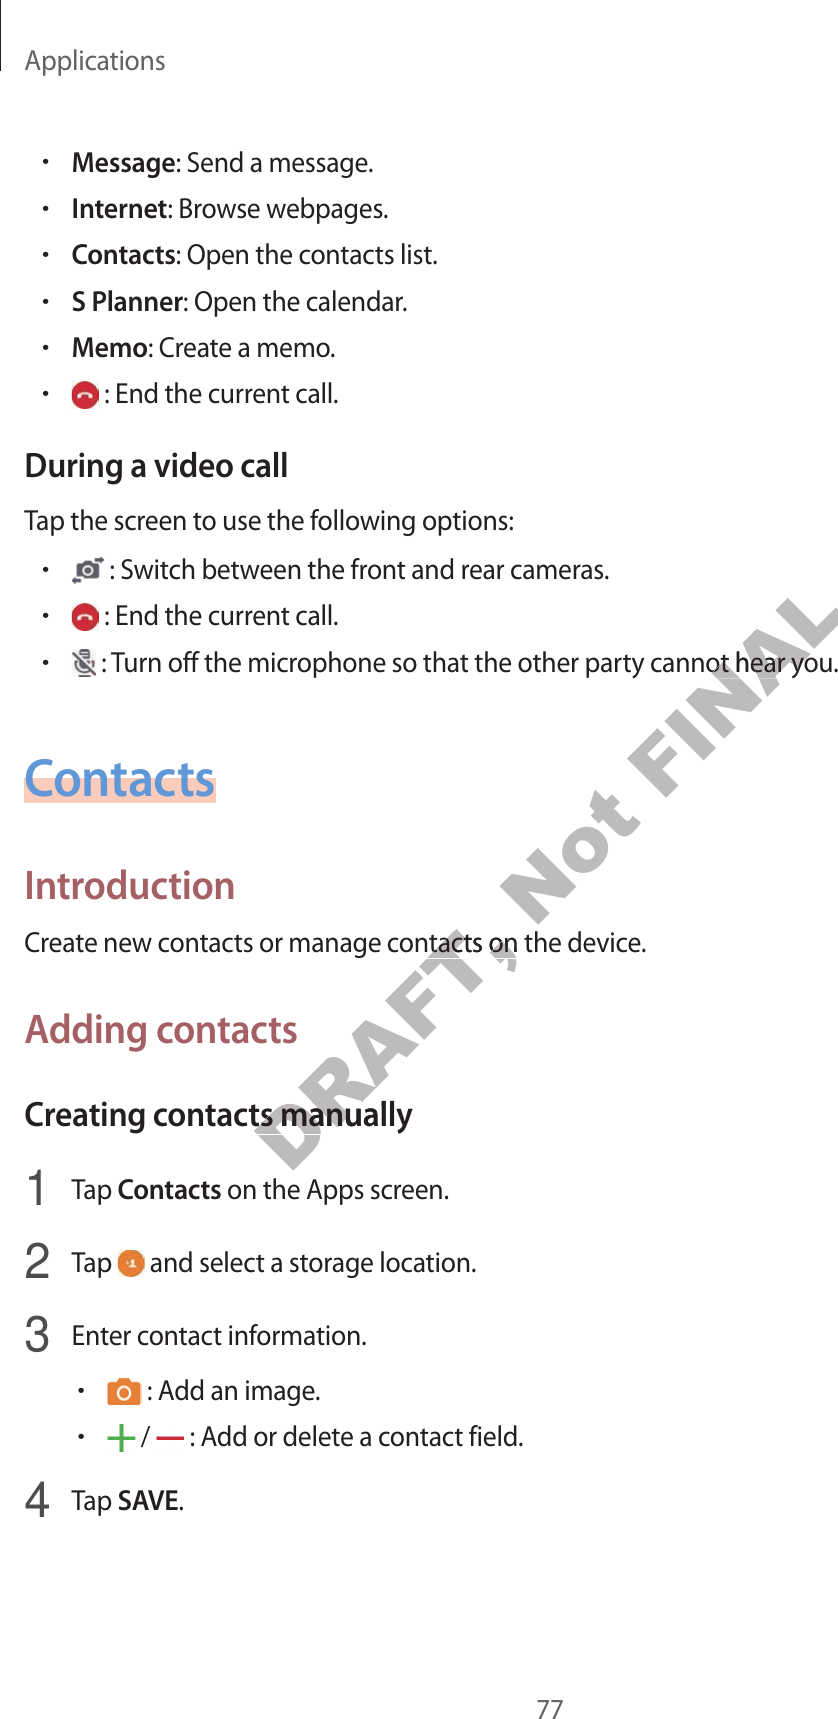 Applications77•Message: Send a message.•Internet: Brow se w ebpages .•Contacts: Open the contacts list.•S Planner: Open the calendar.•Memo: Creat e a memo.• : End the current call .During a video callTap the screen to use the f ollo wing options:• : Switch between the fr on t and r ear cameras .• : End the current call .• : Turn off the microphone so tha t the other party cannot hear you.ContactsIntroductionCreat e new c ontacts or manage contacts on the device.A dding con tactsCrea ting c ontacts manually1 Tap Contacts on the Apps screen.2 Tap   and select a storage location.3 Enter con tact information.• : Add an image .• /   : Add or delet e a con tact field.4 Tap SAVE.DRAFT, Creat e new c ontacts or manage contacts on the device.DRAFT, Creat e new c ontacts or manage contacts on the device.Crea ting c ontacts manuallyDRAFT, Crea ting c ontacts manually on the Apps screen.DRAFT,  on the Apps screen.Not FINAL : Turn off the microphone so tha t the other party cannot hear you.FINAL : Turn off the microphone so tha t the other party cannot hear you.